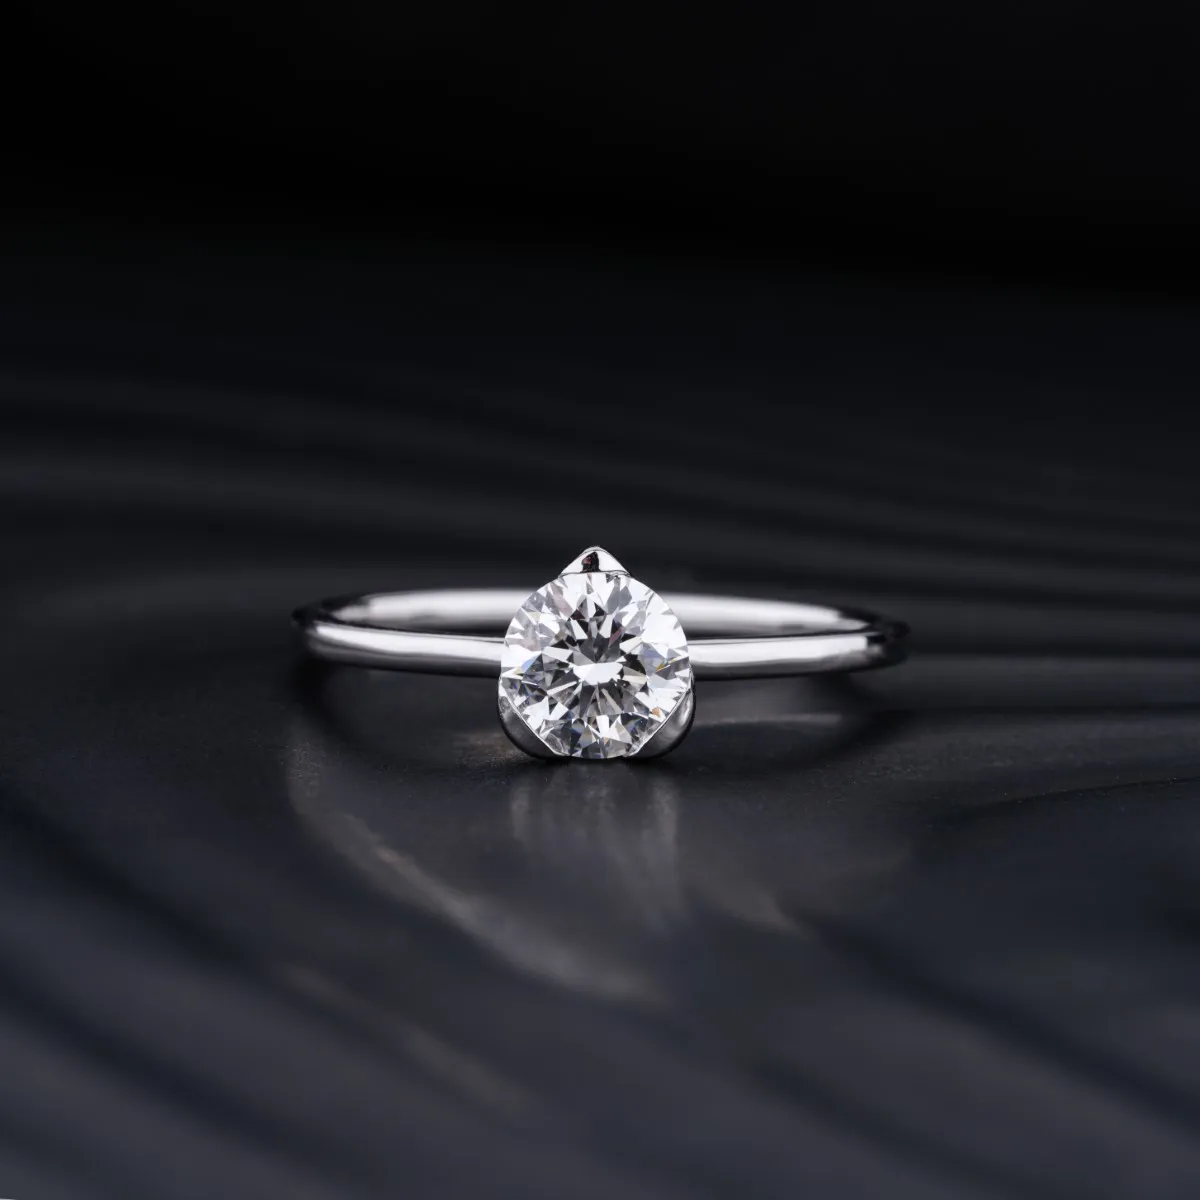 Heart Shaped Round Solitaire Ring | Heart Shaped Round Solitaire Ring | Solitarie Round Diamond Ring Heart Shaped | Earthly Jewels